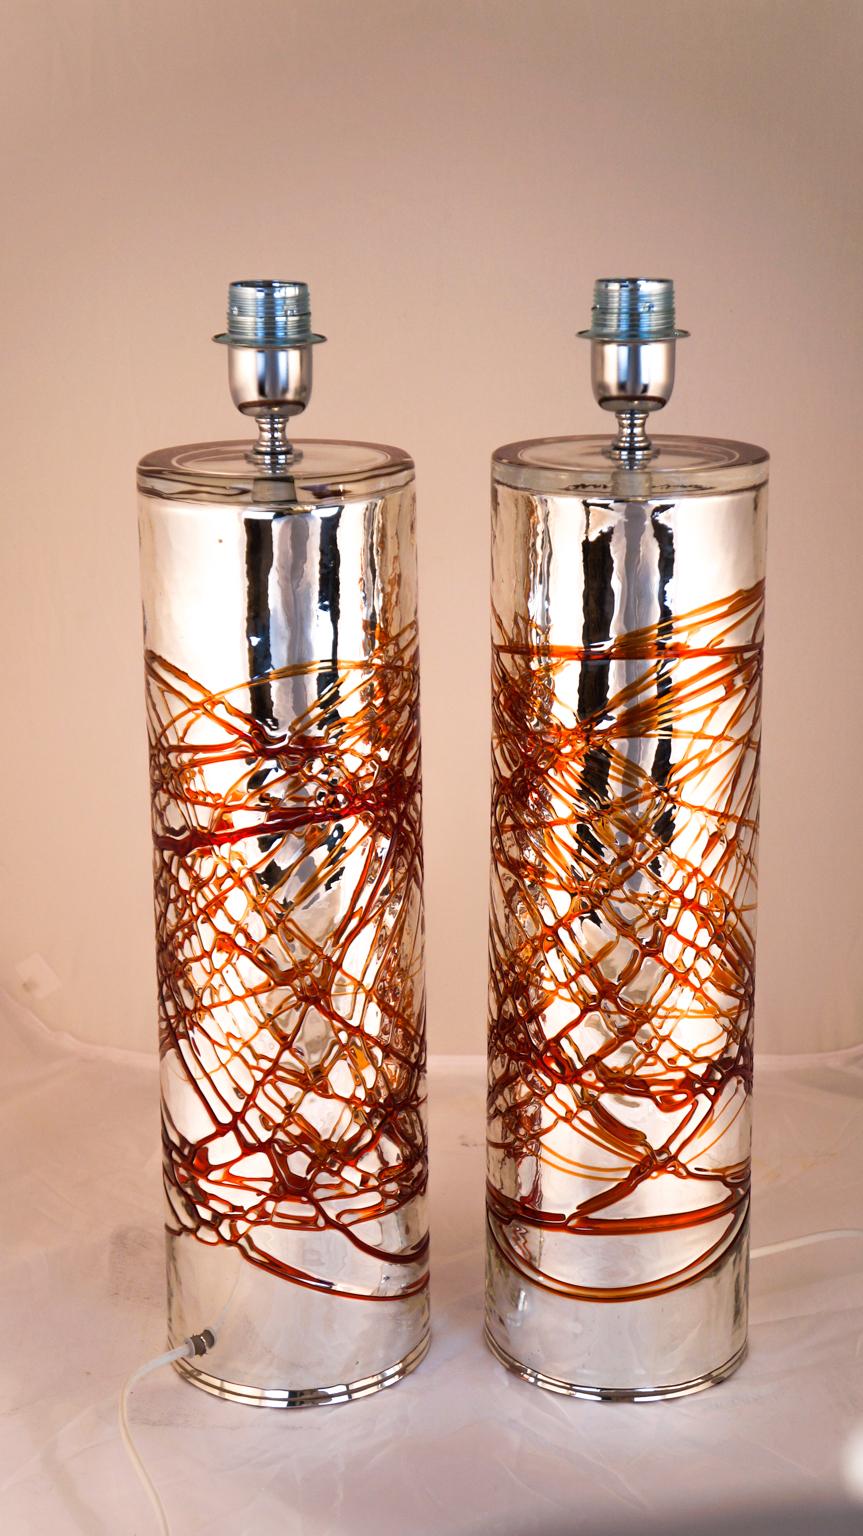 Alberto Donà Mid-Century Modern Pair of Murano Glass Table Lamps Signed, 1990s For Sale 7